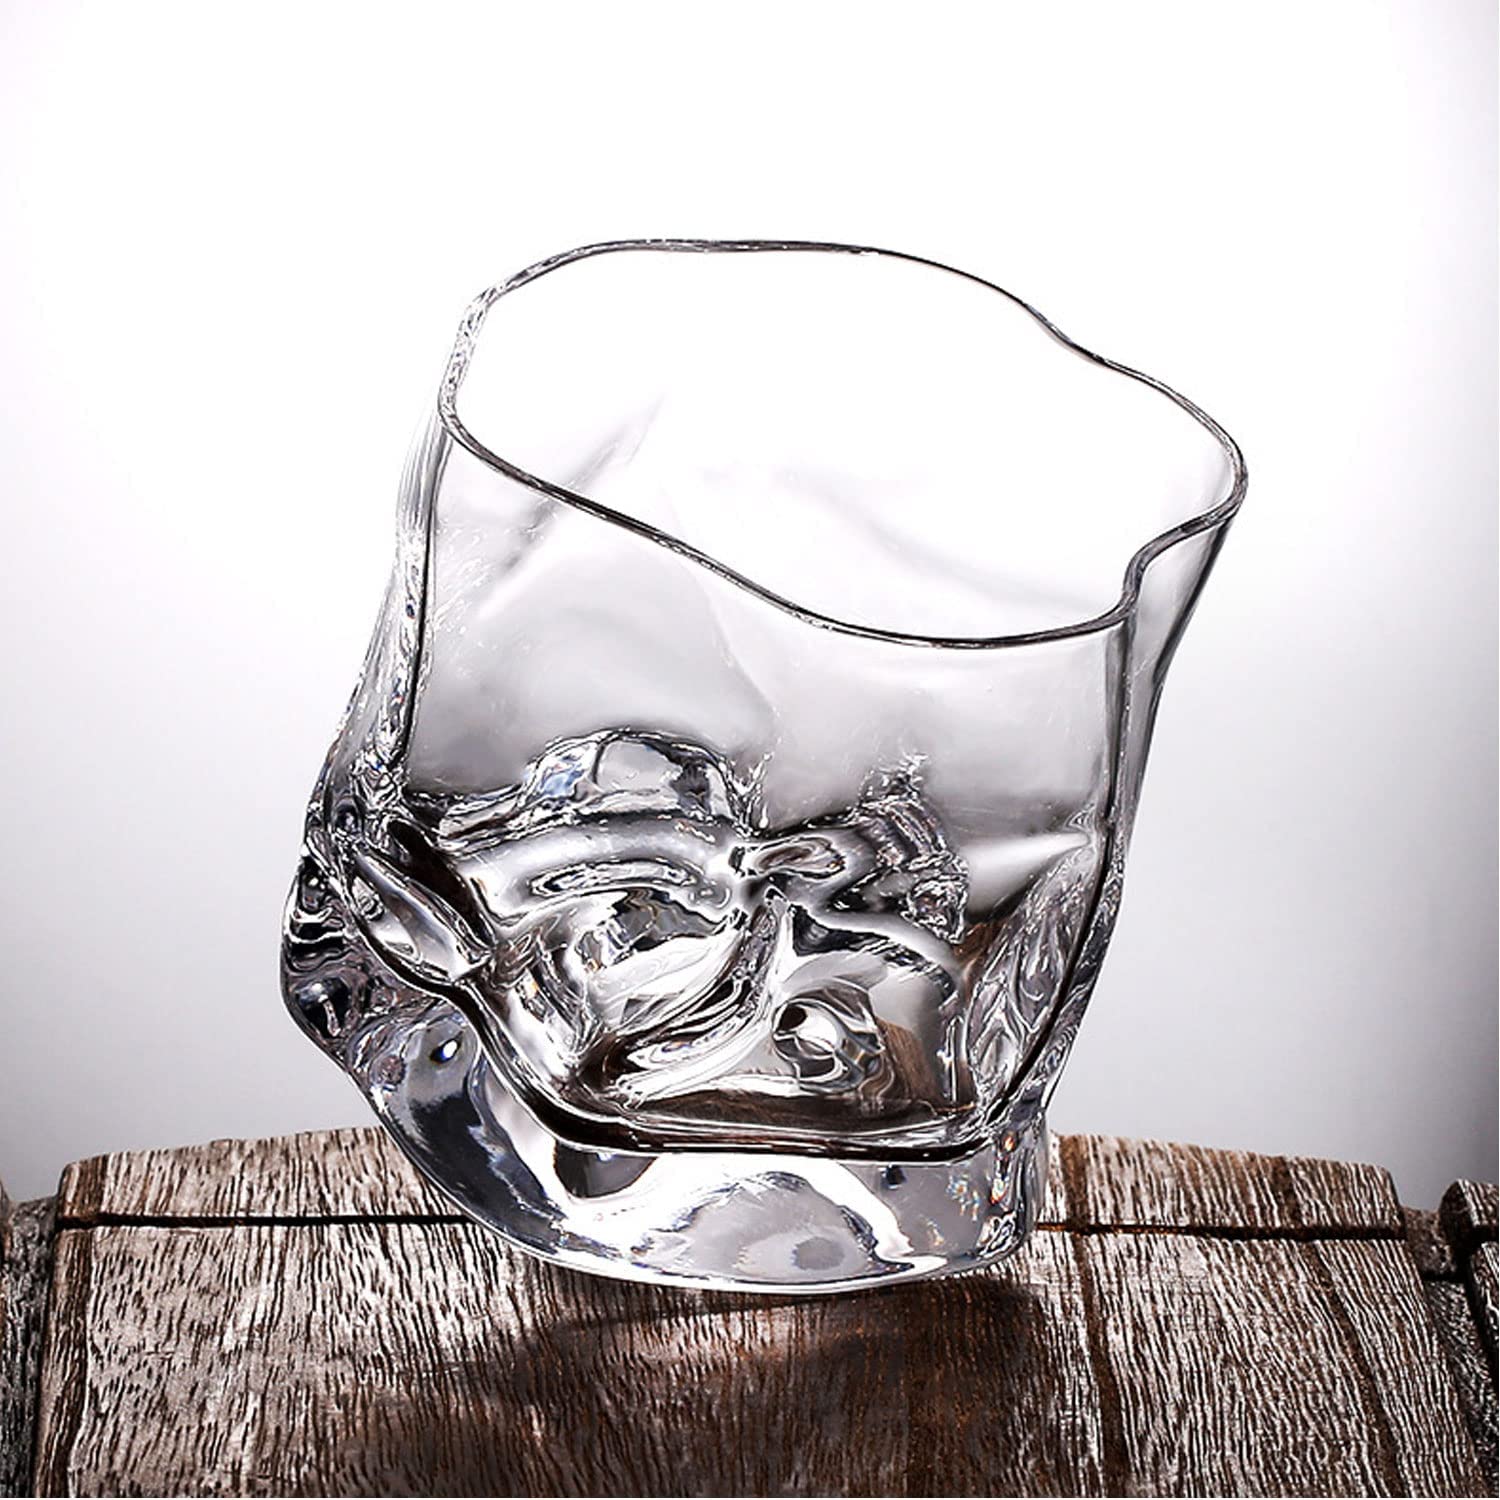 IrreGular Wine Glasses Crystal Whiskey Glasses, Old Fashioned Lowball Bar Tumblers for Drinking